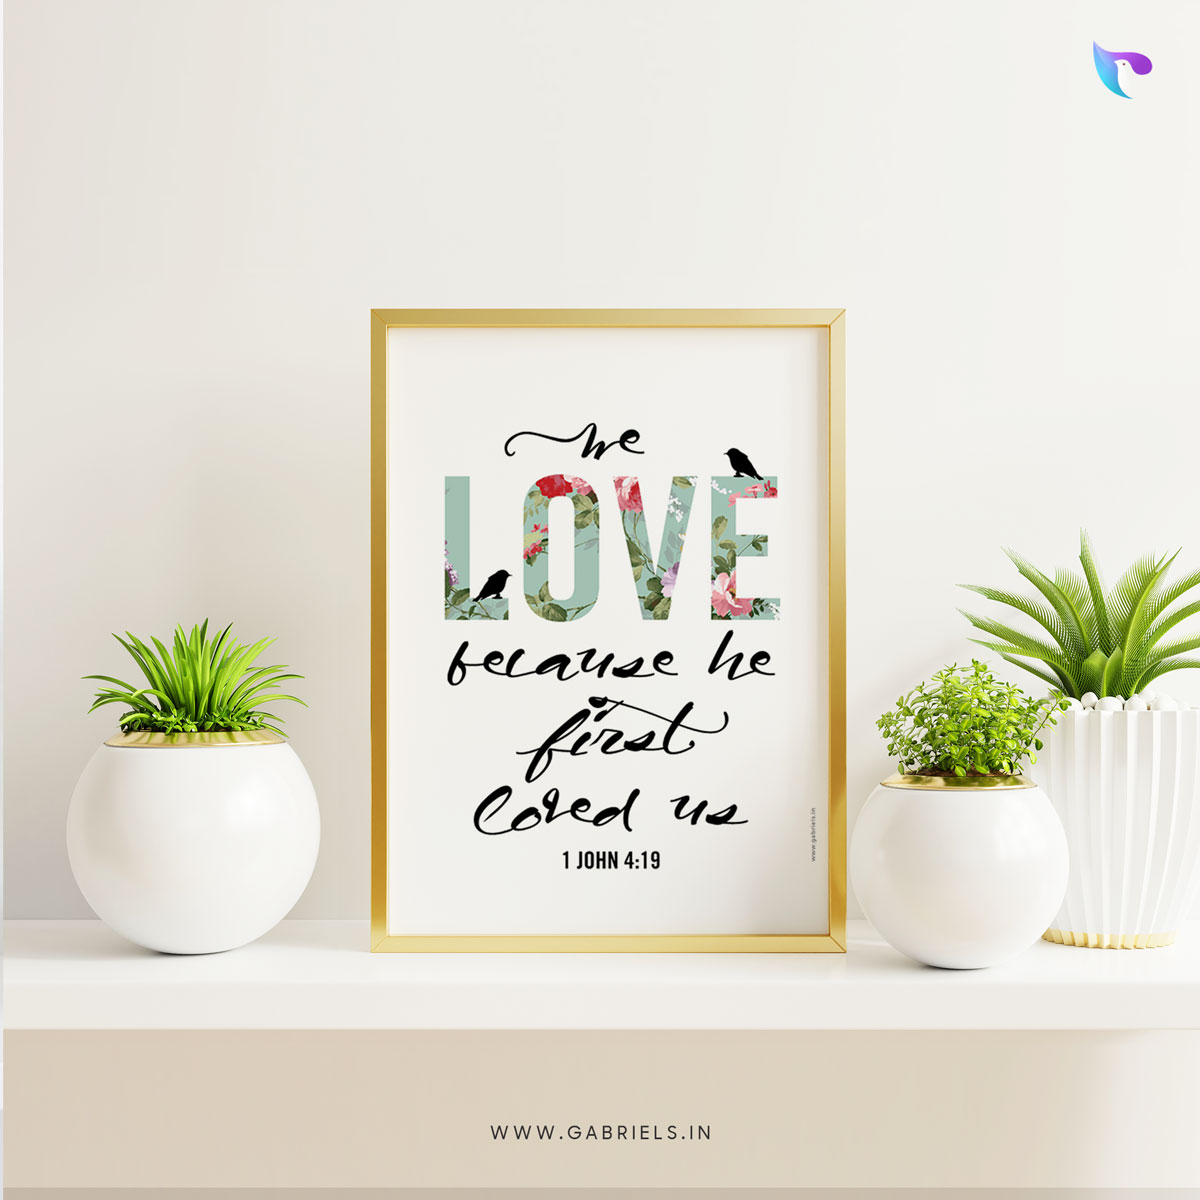 Buy Christian Wall decor from Gabriels | Best Christians Store india